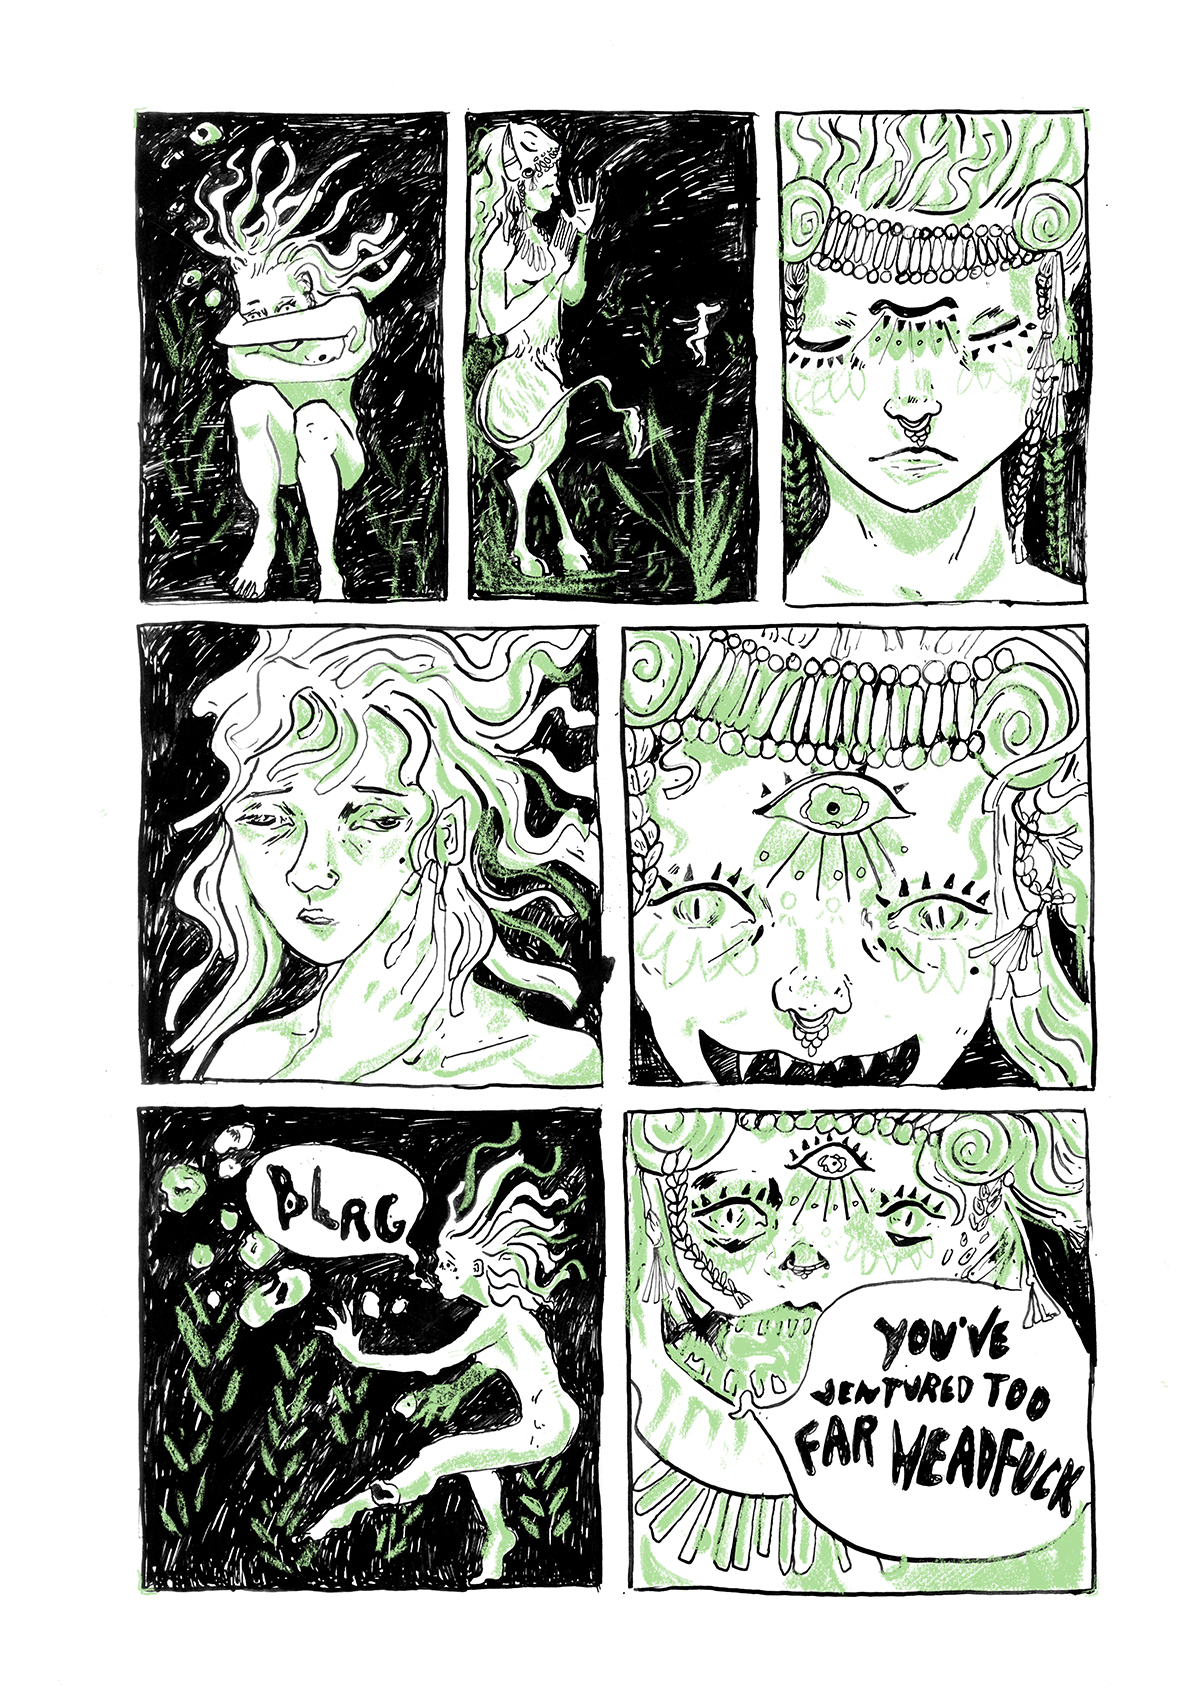 Black and white comic illustration with green spot color. 7 panel show a mystical woman awaking underwater, text reads 'Blrg...you’ve ventured too far headfuck'